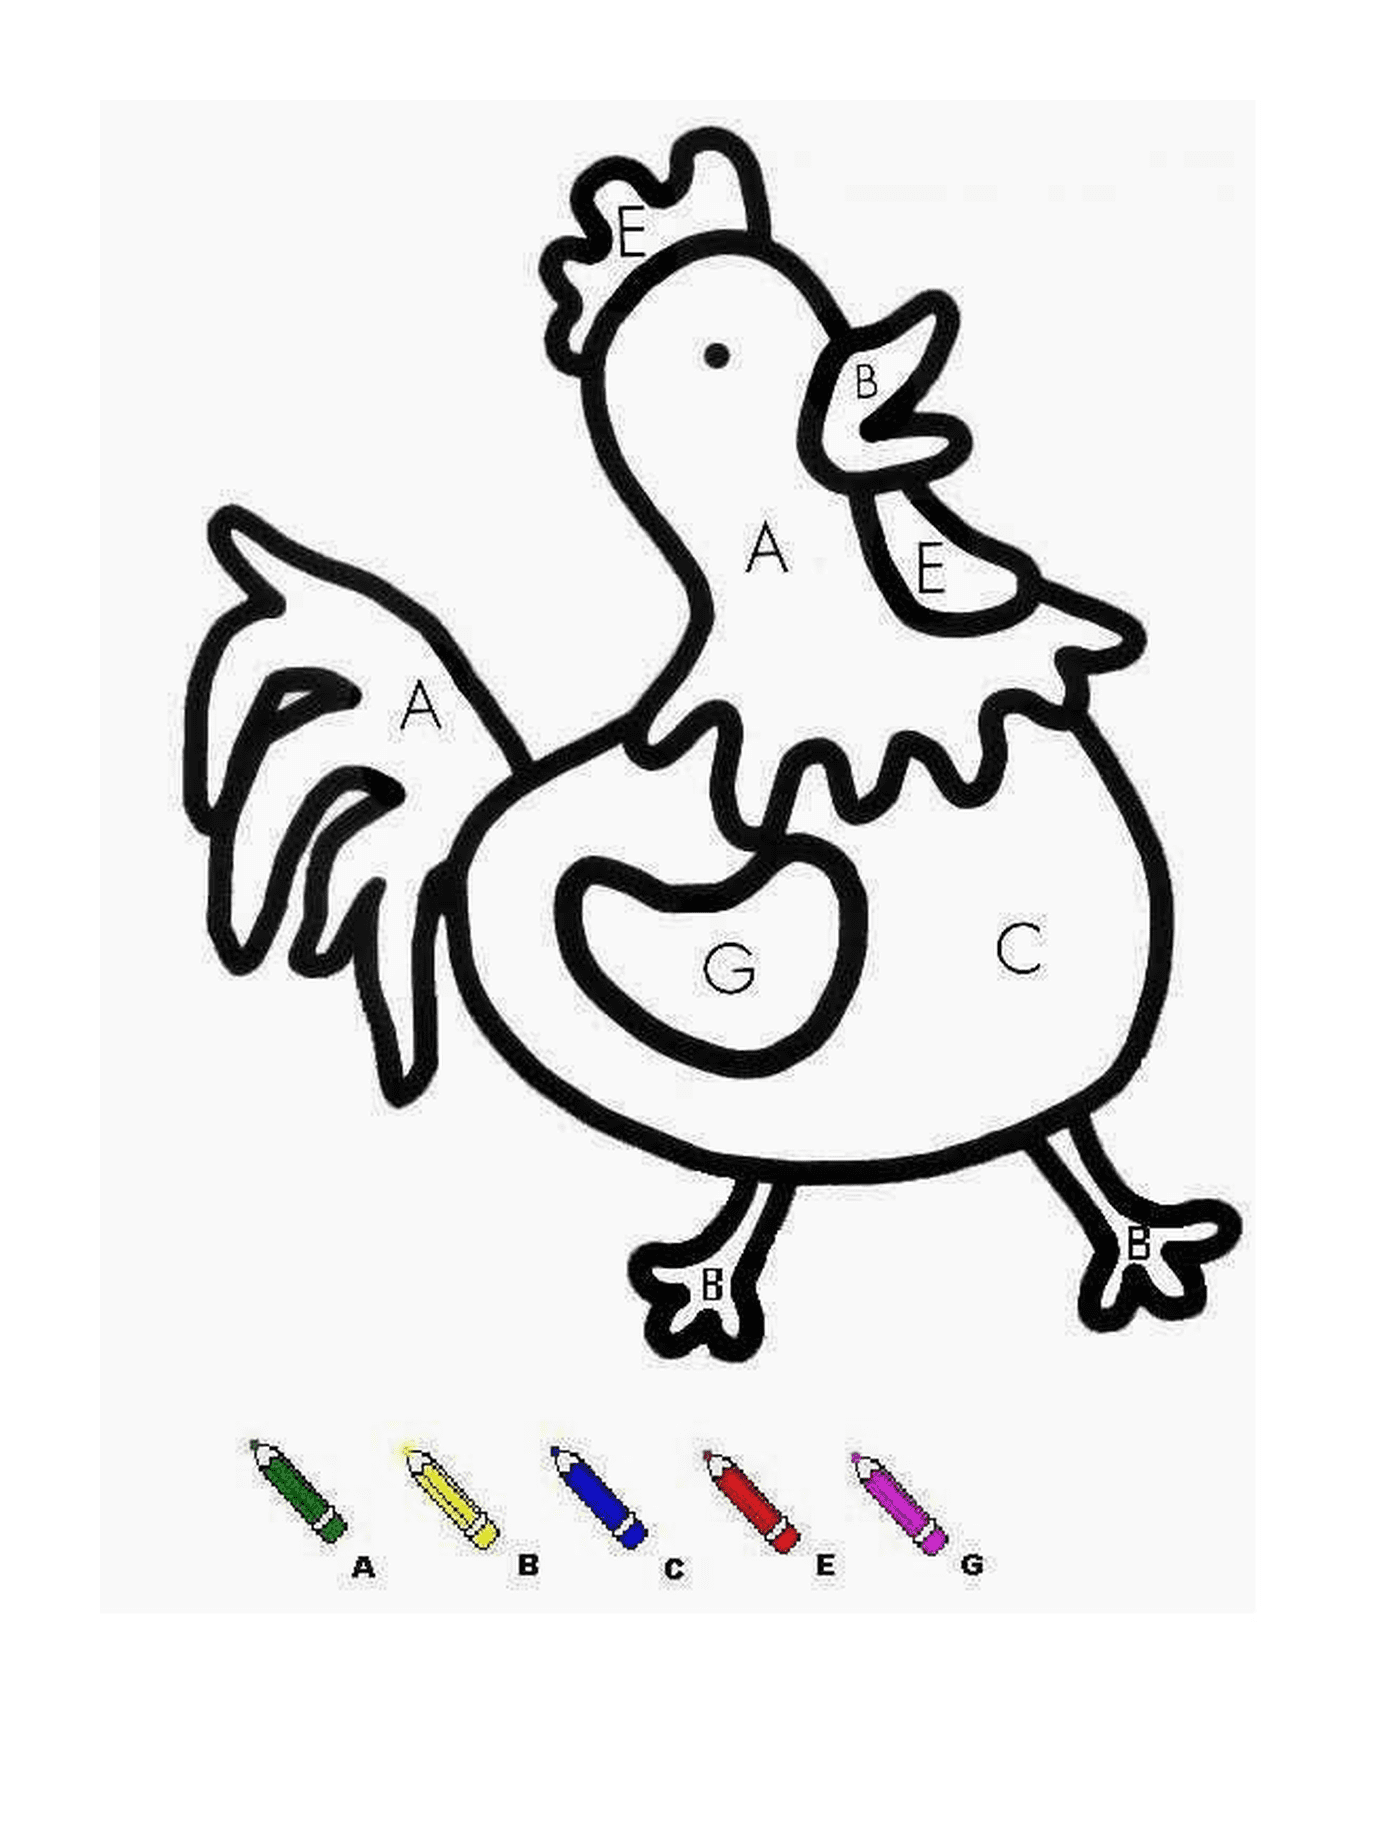  A chicken with colored markers 